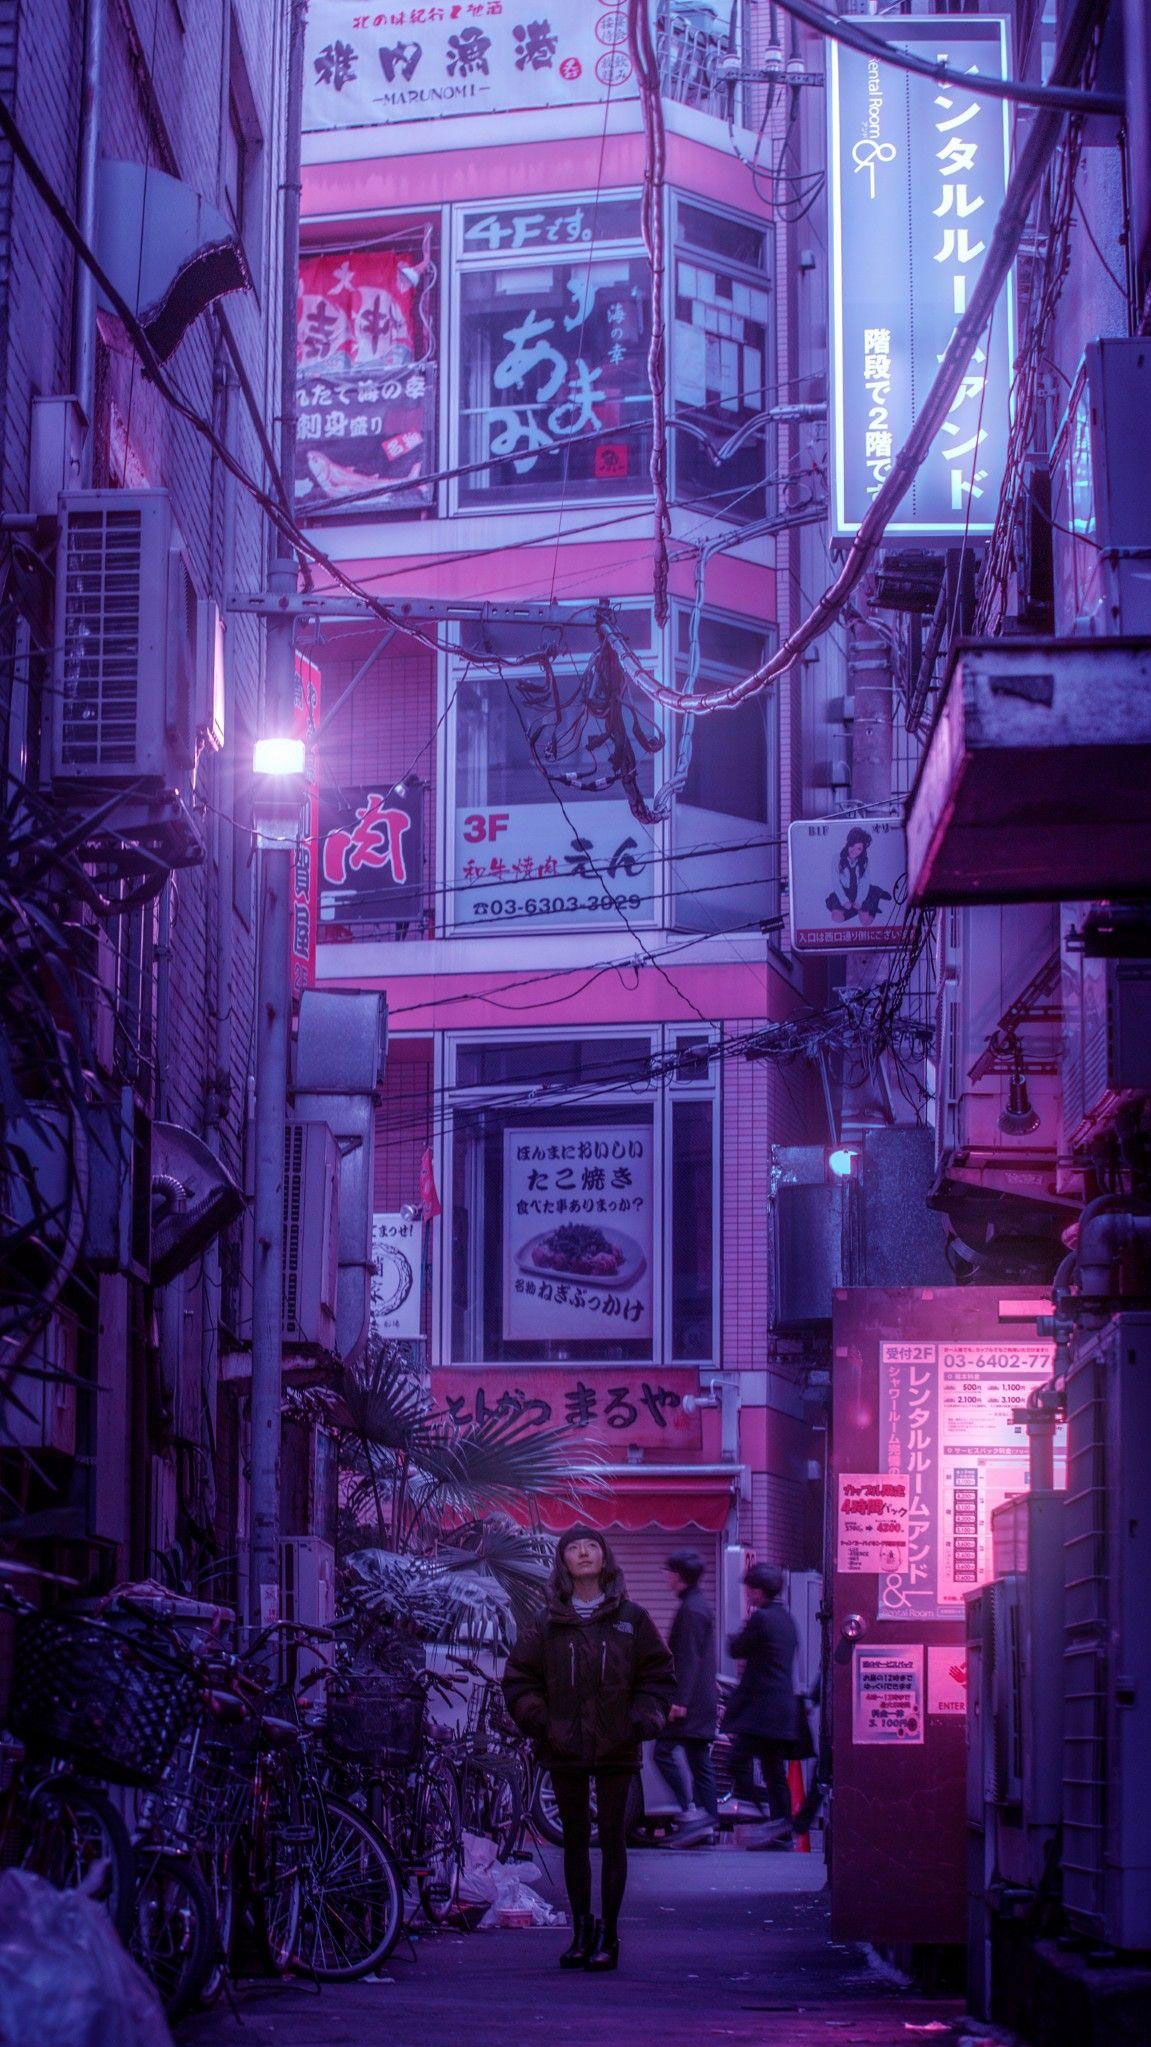 A person walking down an alley way at night - Lo fi, anime city